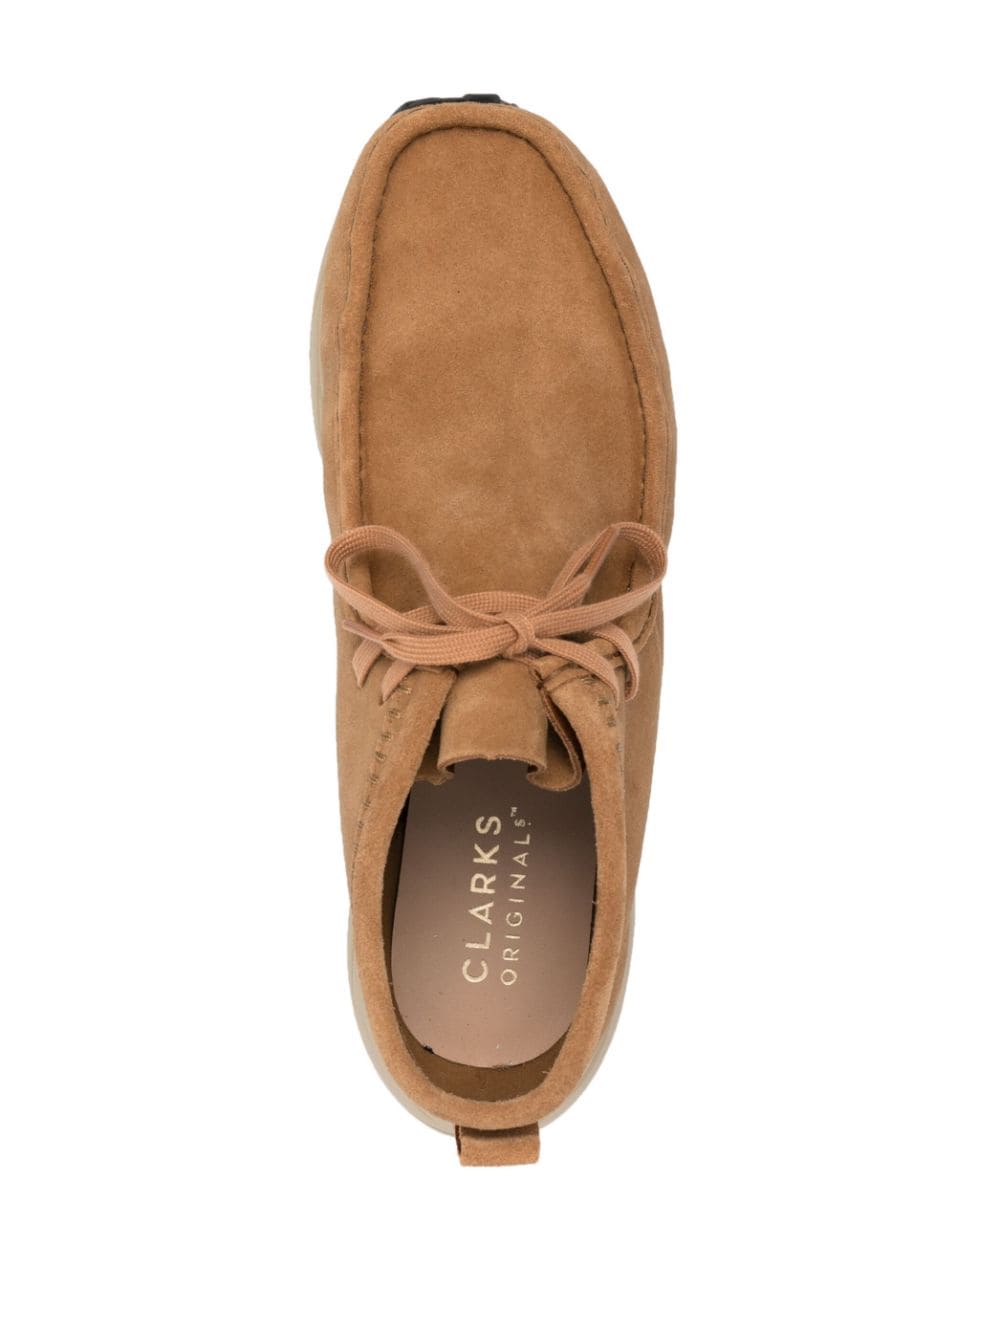 CLARKS CLARKS- Wallabee Suede Leather Shoes